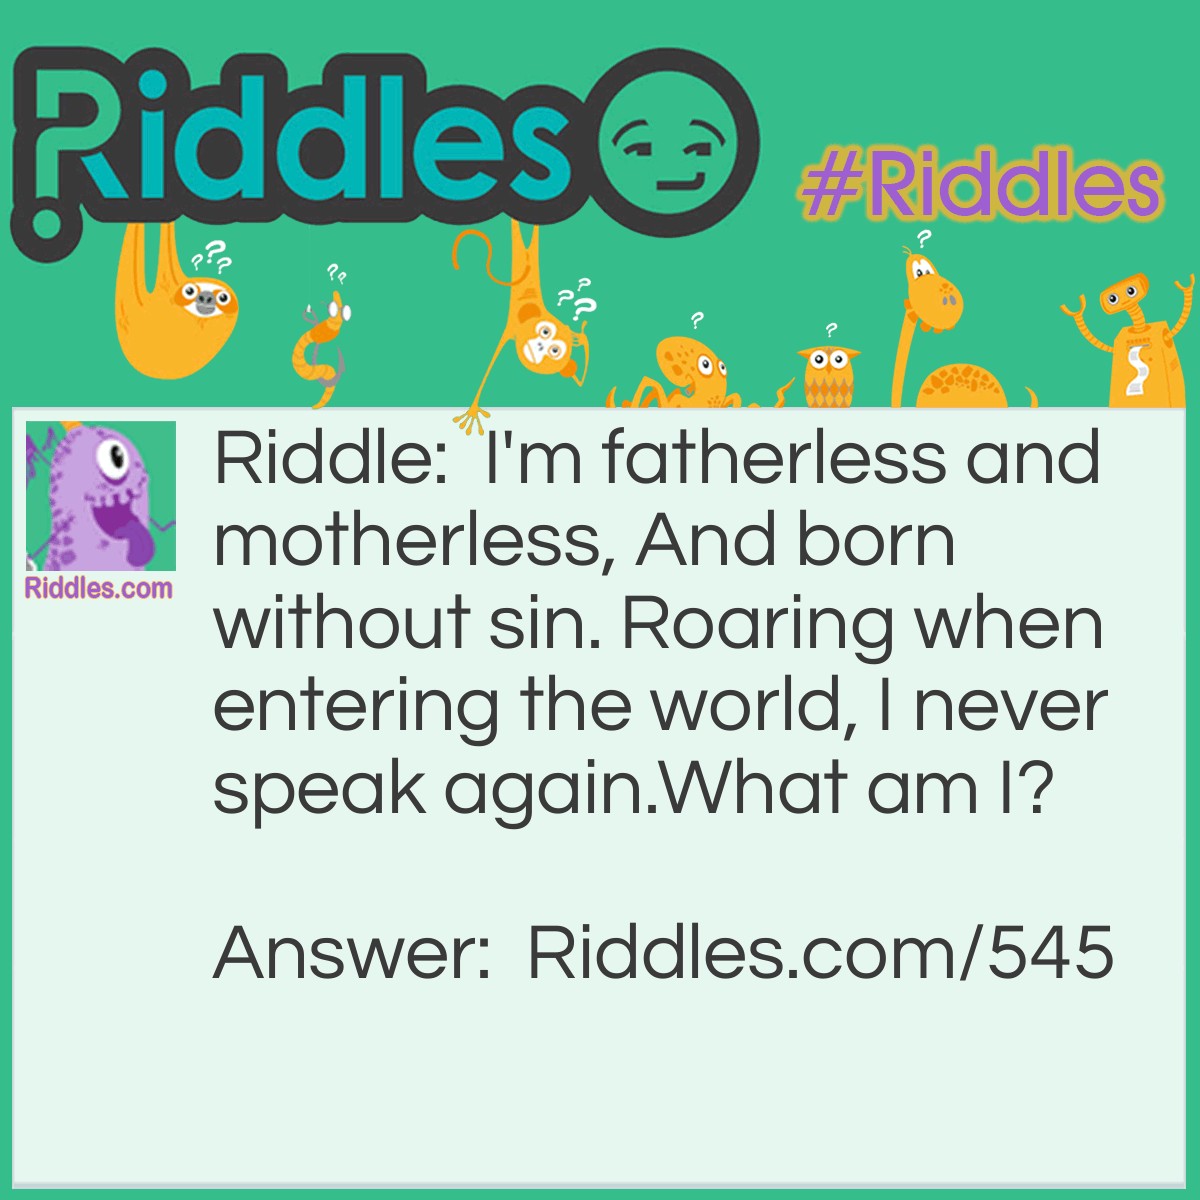 Riddle: I'm fatherless and motherless, And born without sin. Roaring when entering the world, I never speak again.
What am I? Answer: Thunder.